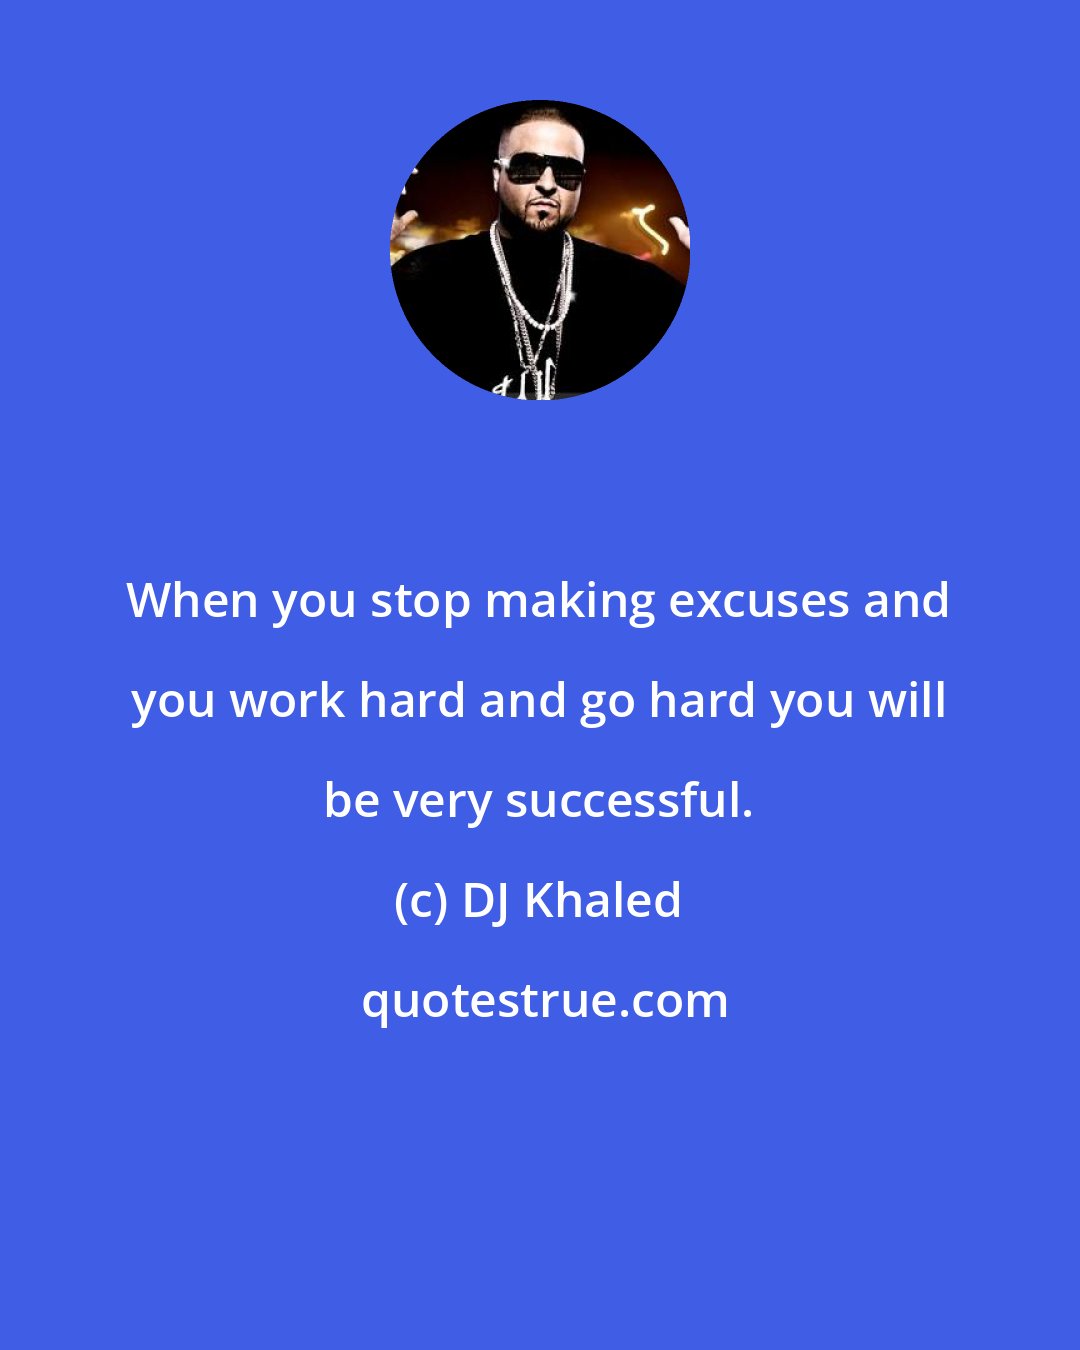 DJ Khaled: When you stop making excuses and you work hard and go hard you will be very successful.